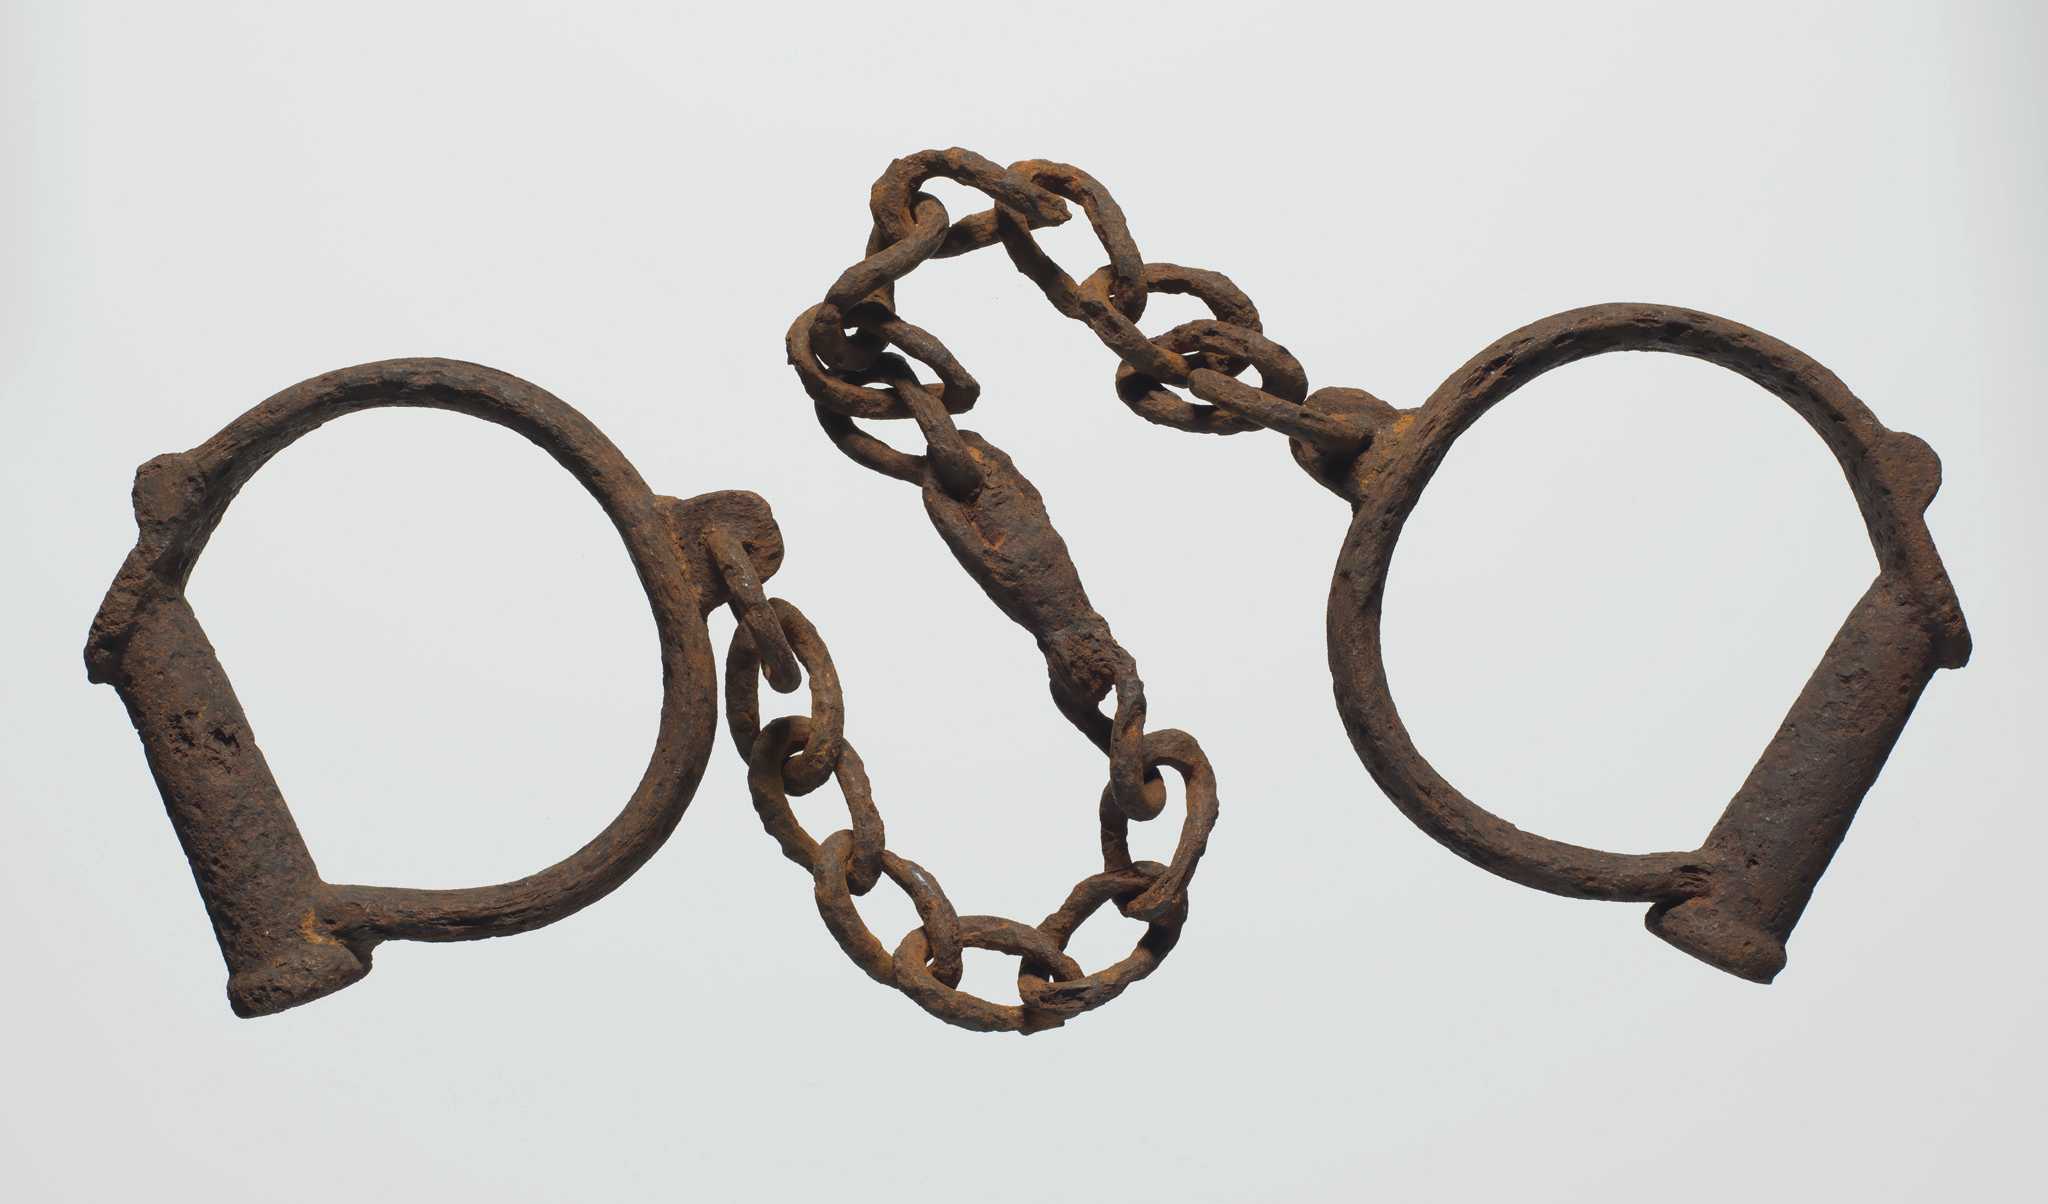 Two iron shackles consisting of iron loops joined together by a length of iron chain. The iron is heavily rusted.